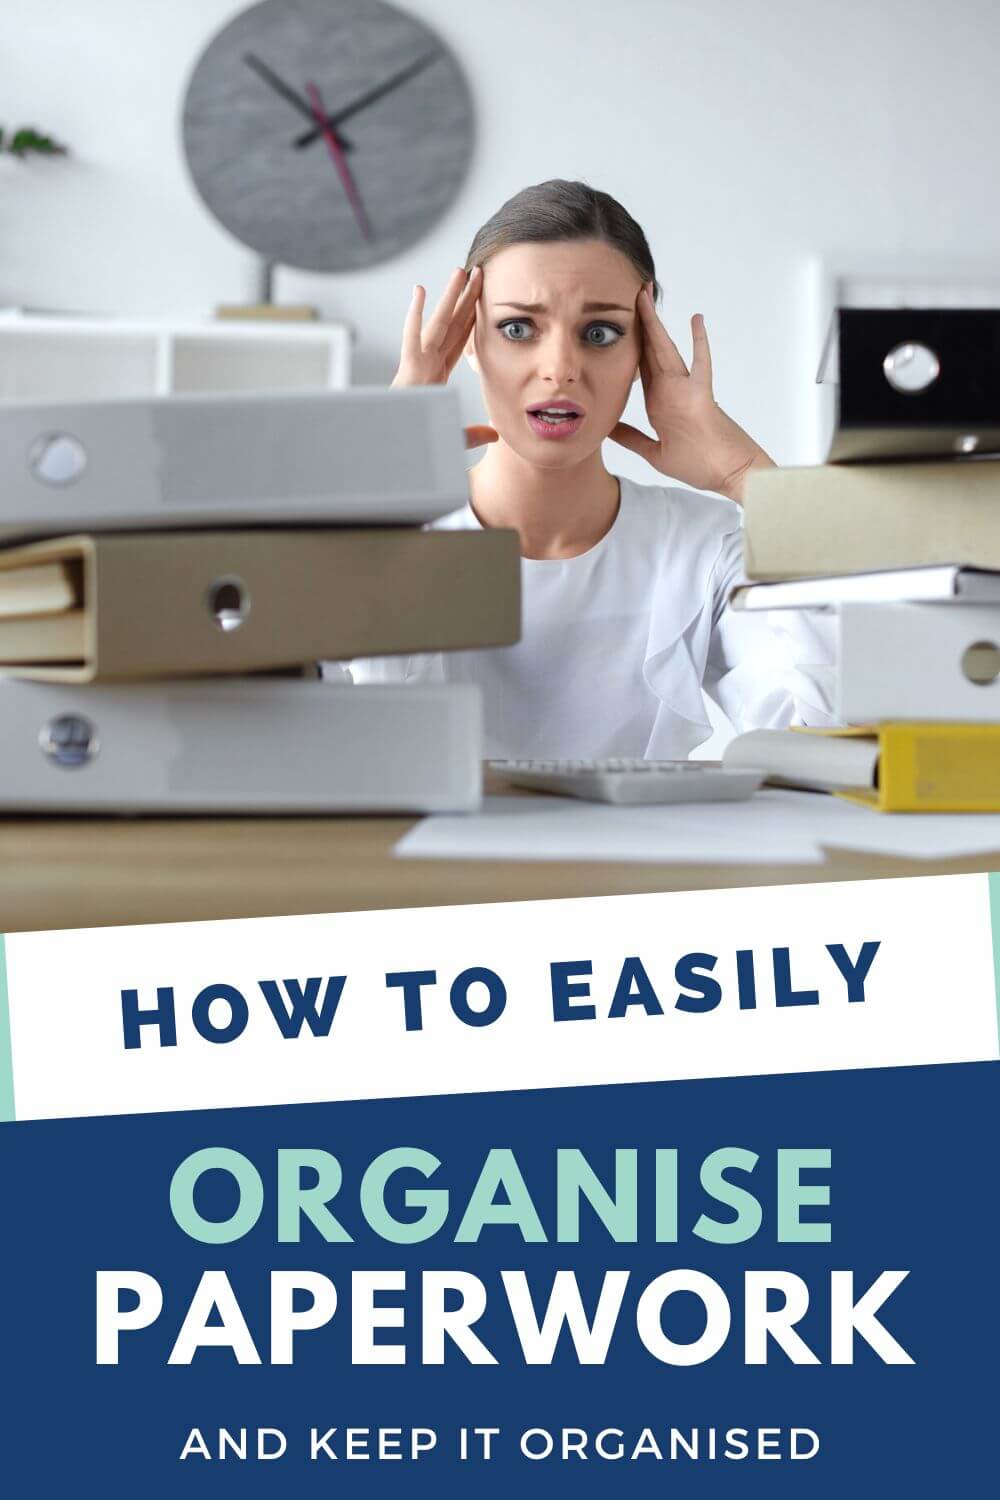 How to organise paperwork at home